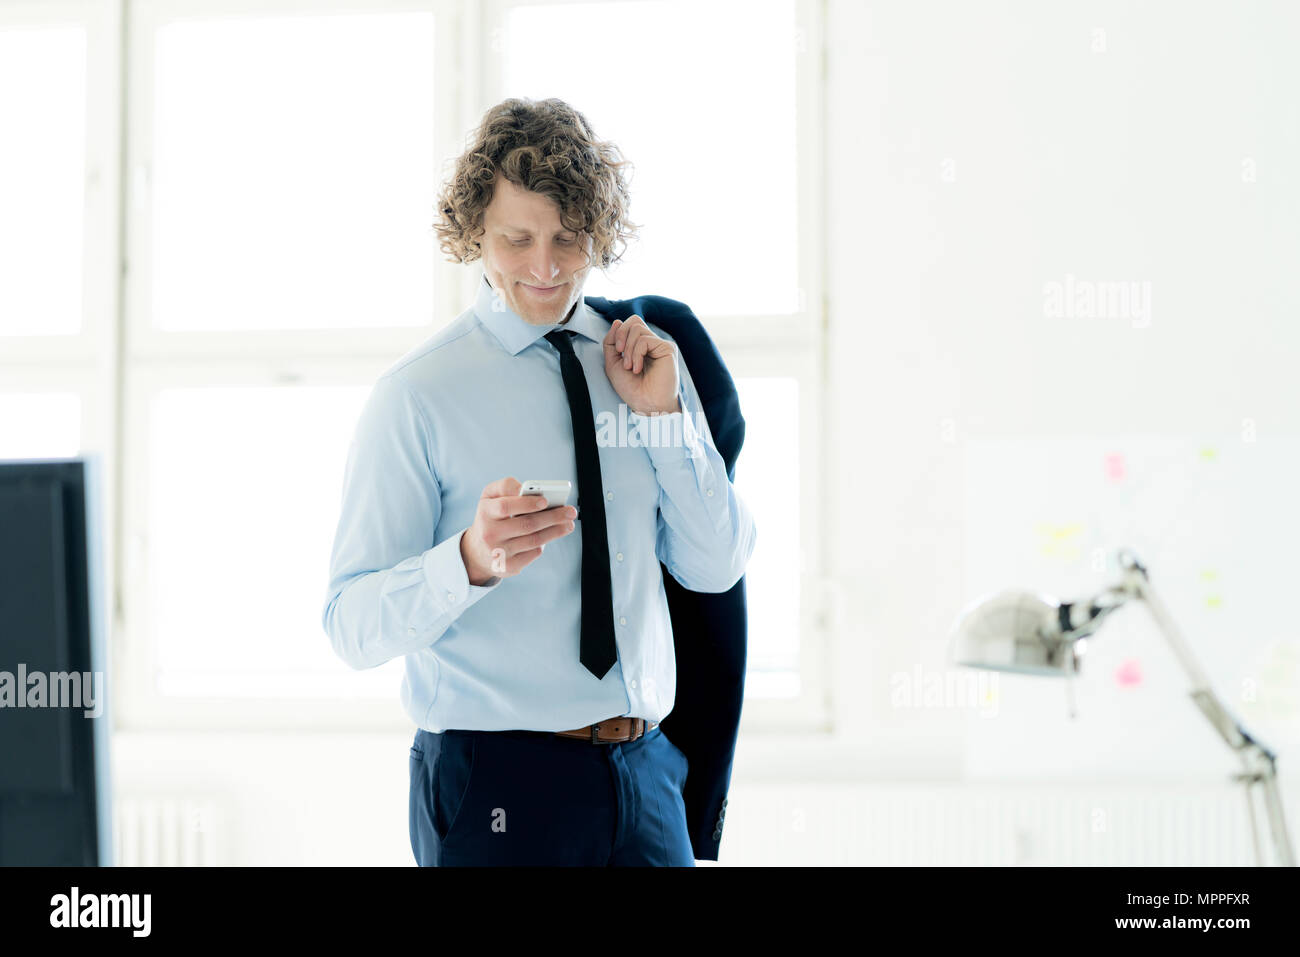 Smart businessman standing in office, using mobile phone Stock Photo